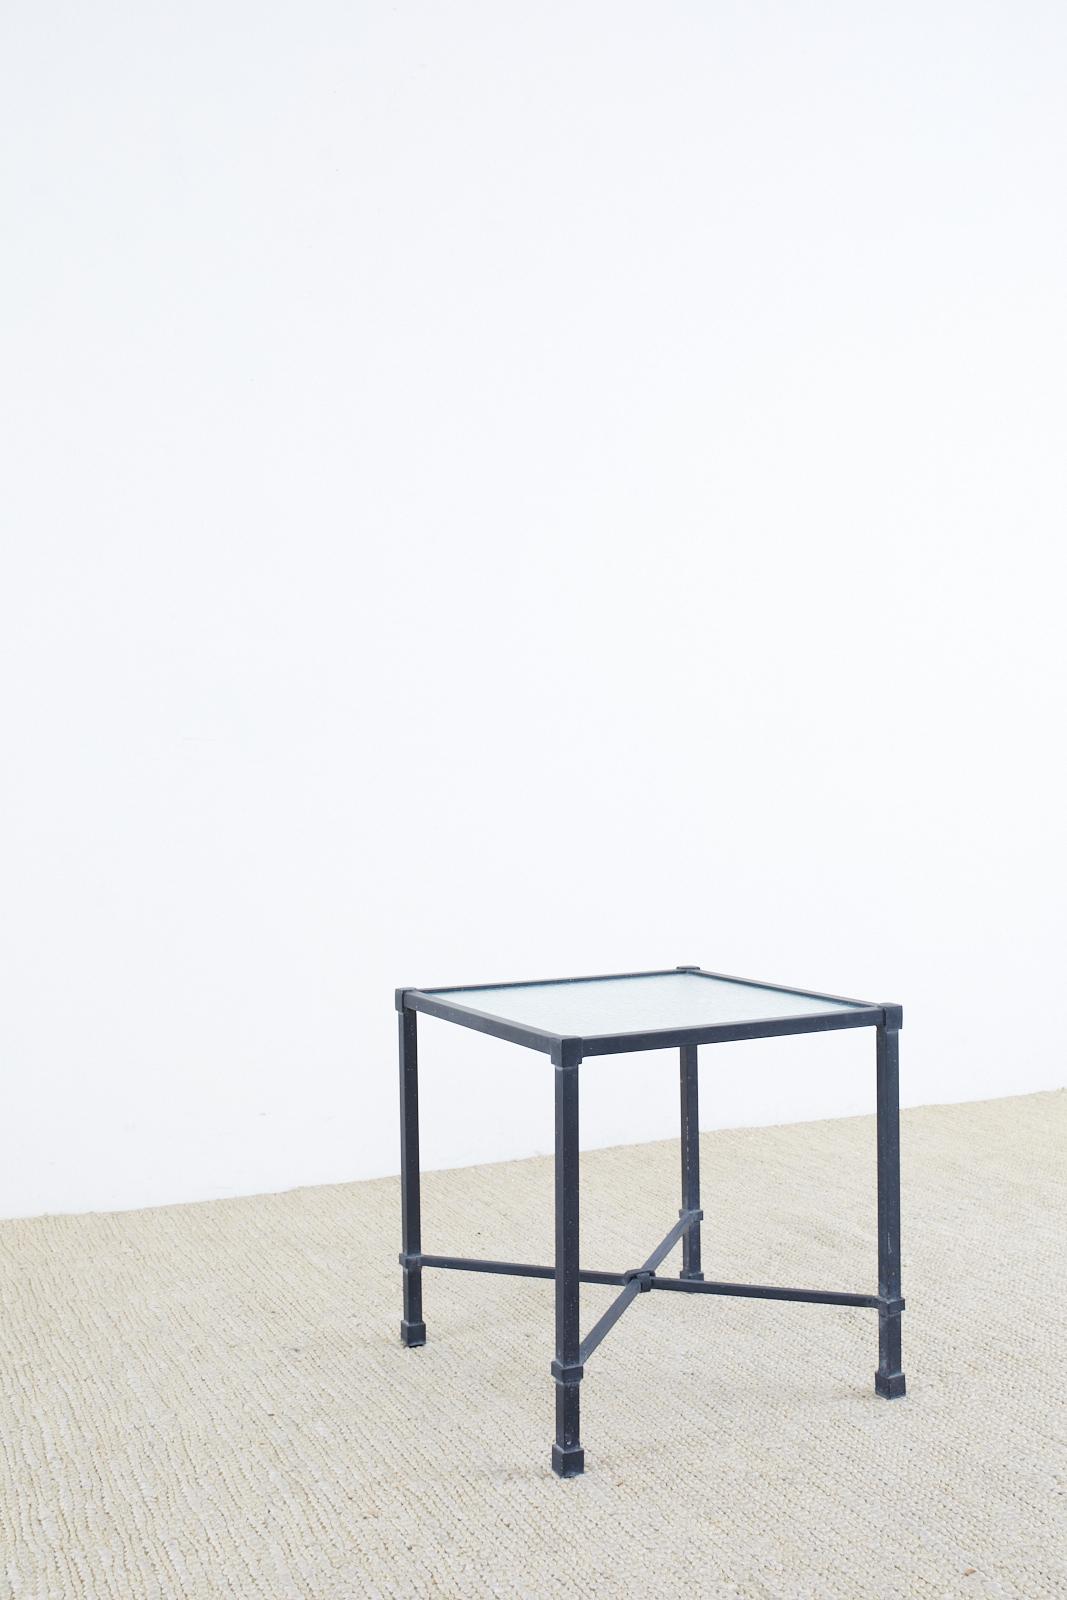 Neoclassical style cube shaped drink tables made by Brown Jordan constructed from powder-coated aluminum with a frosted glass inset top. The square legs are conjoined by an X-form stretcher with a decorative knot in the middle. From the Venetian